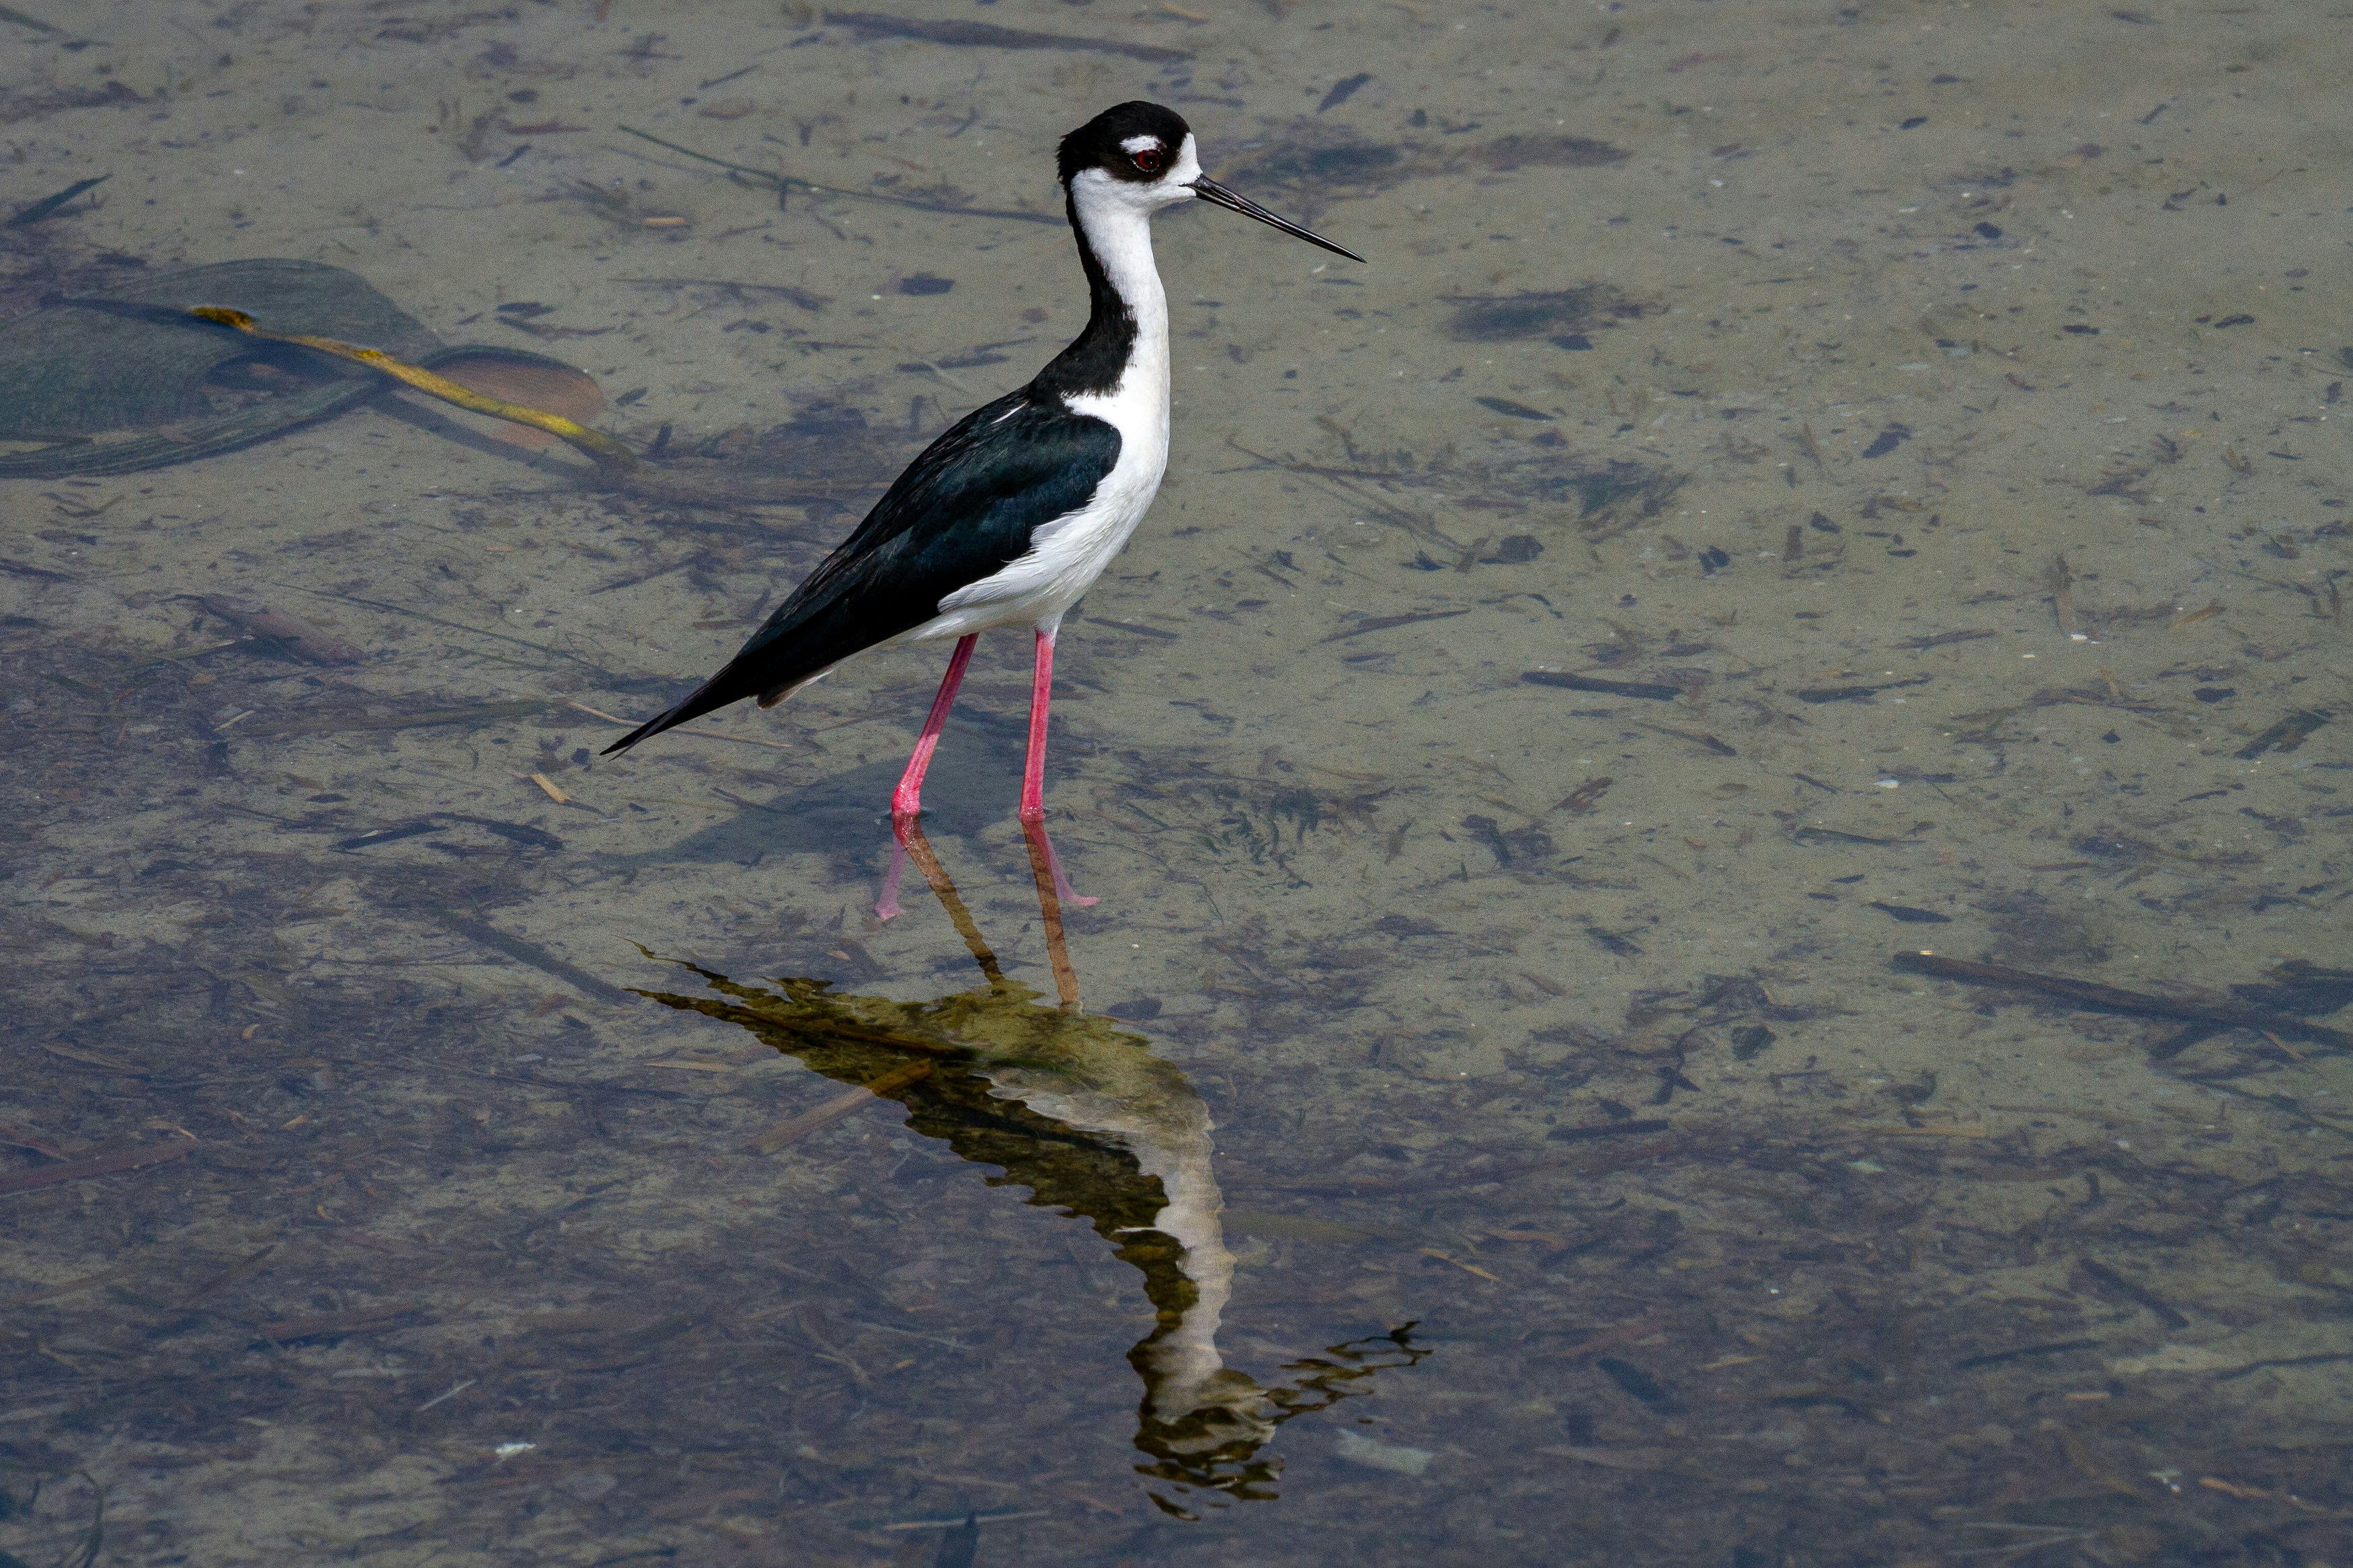 A black-necked stilt wades in the shallow water.